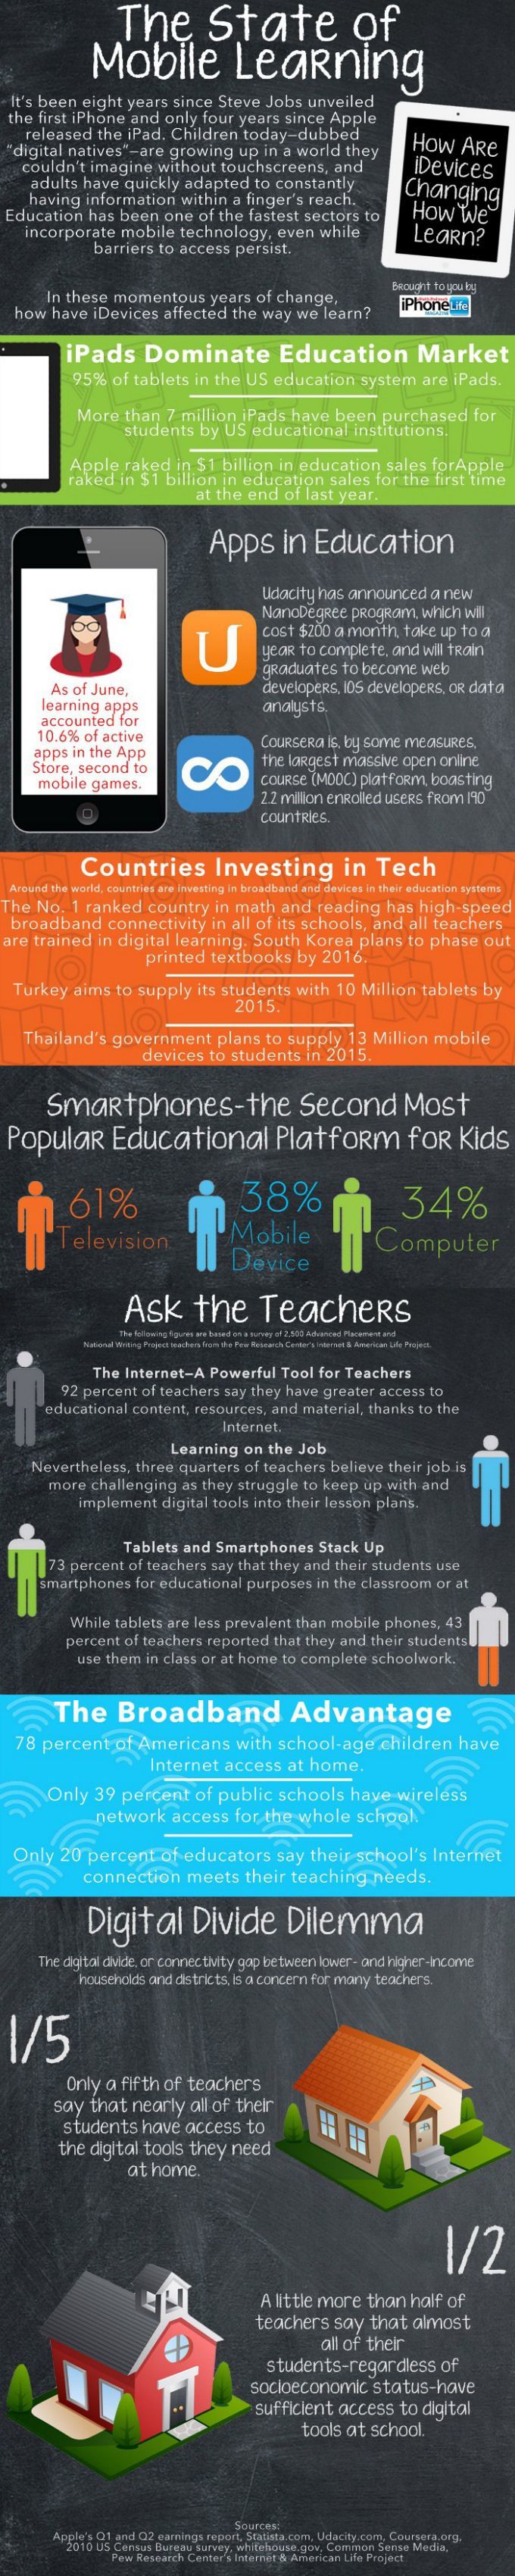 The State of Mobile Learning Infographic